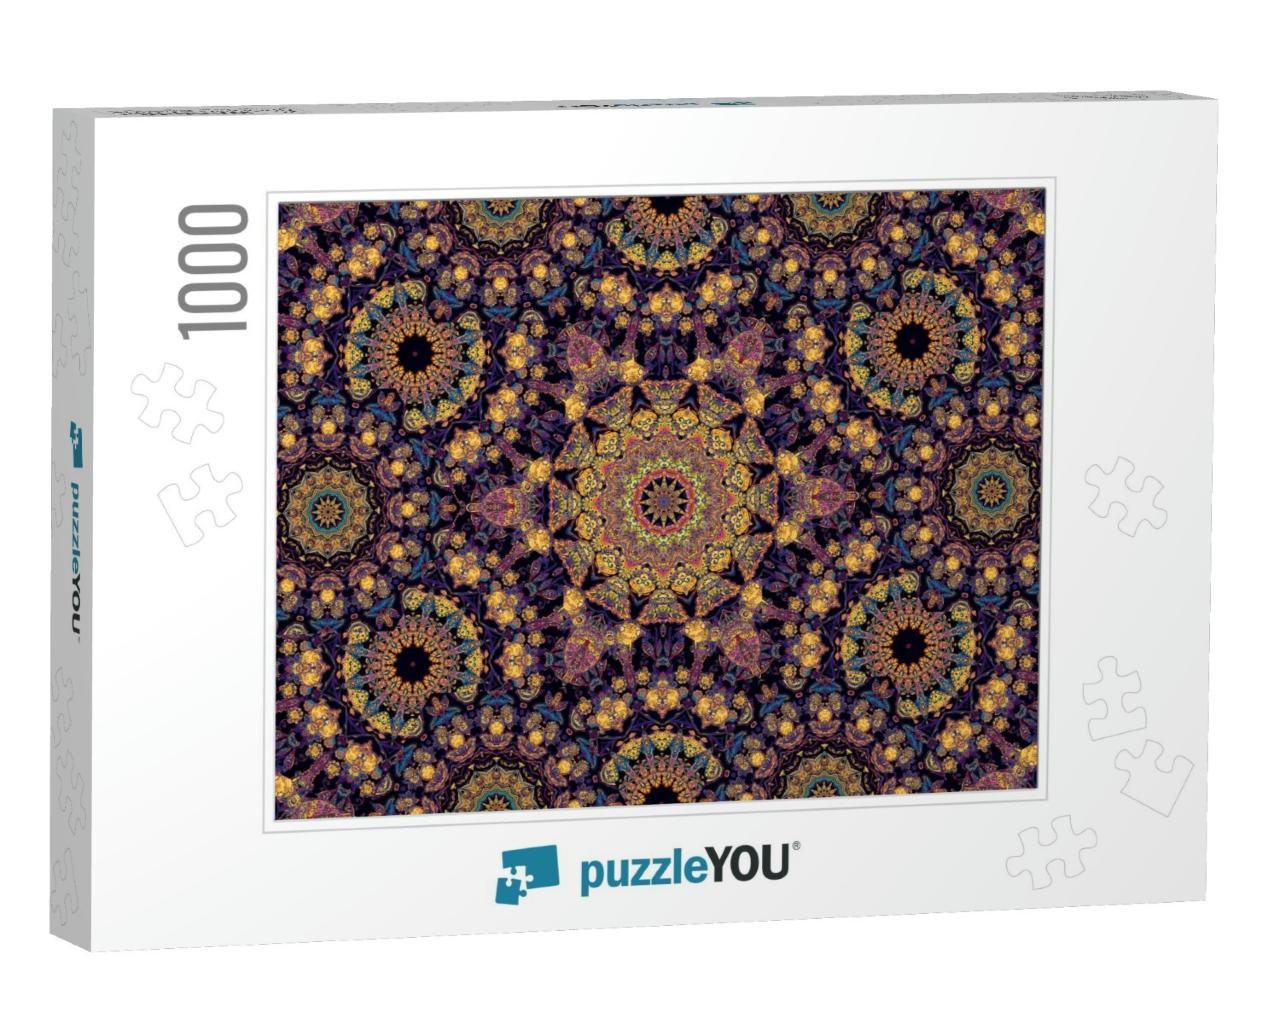 Abstract Islamic Pattern in Arabian Style. Seamless Backg... Jigsaw Puzzle with 1000 pieces